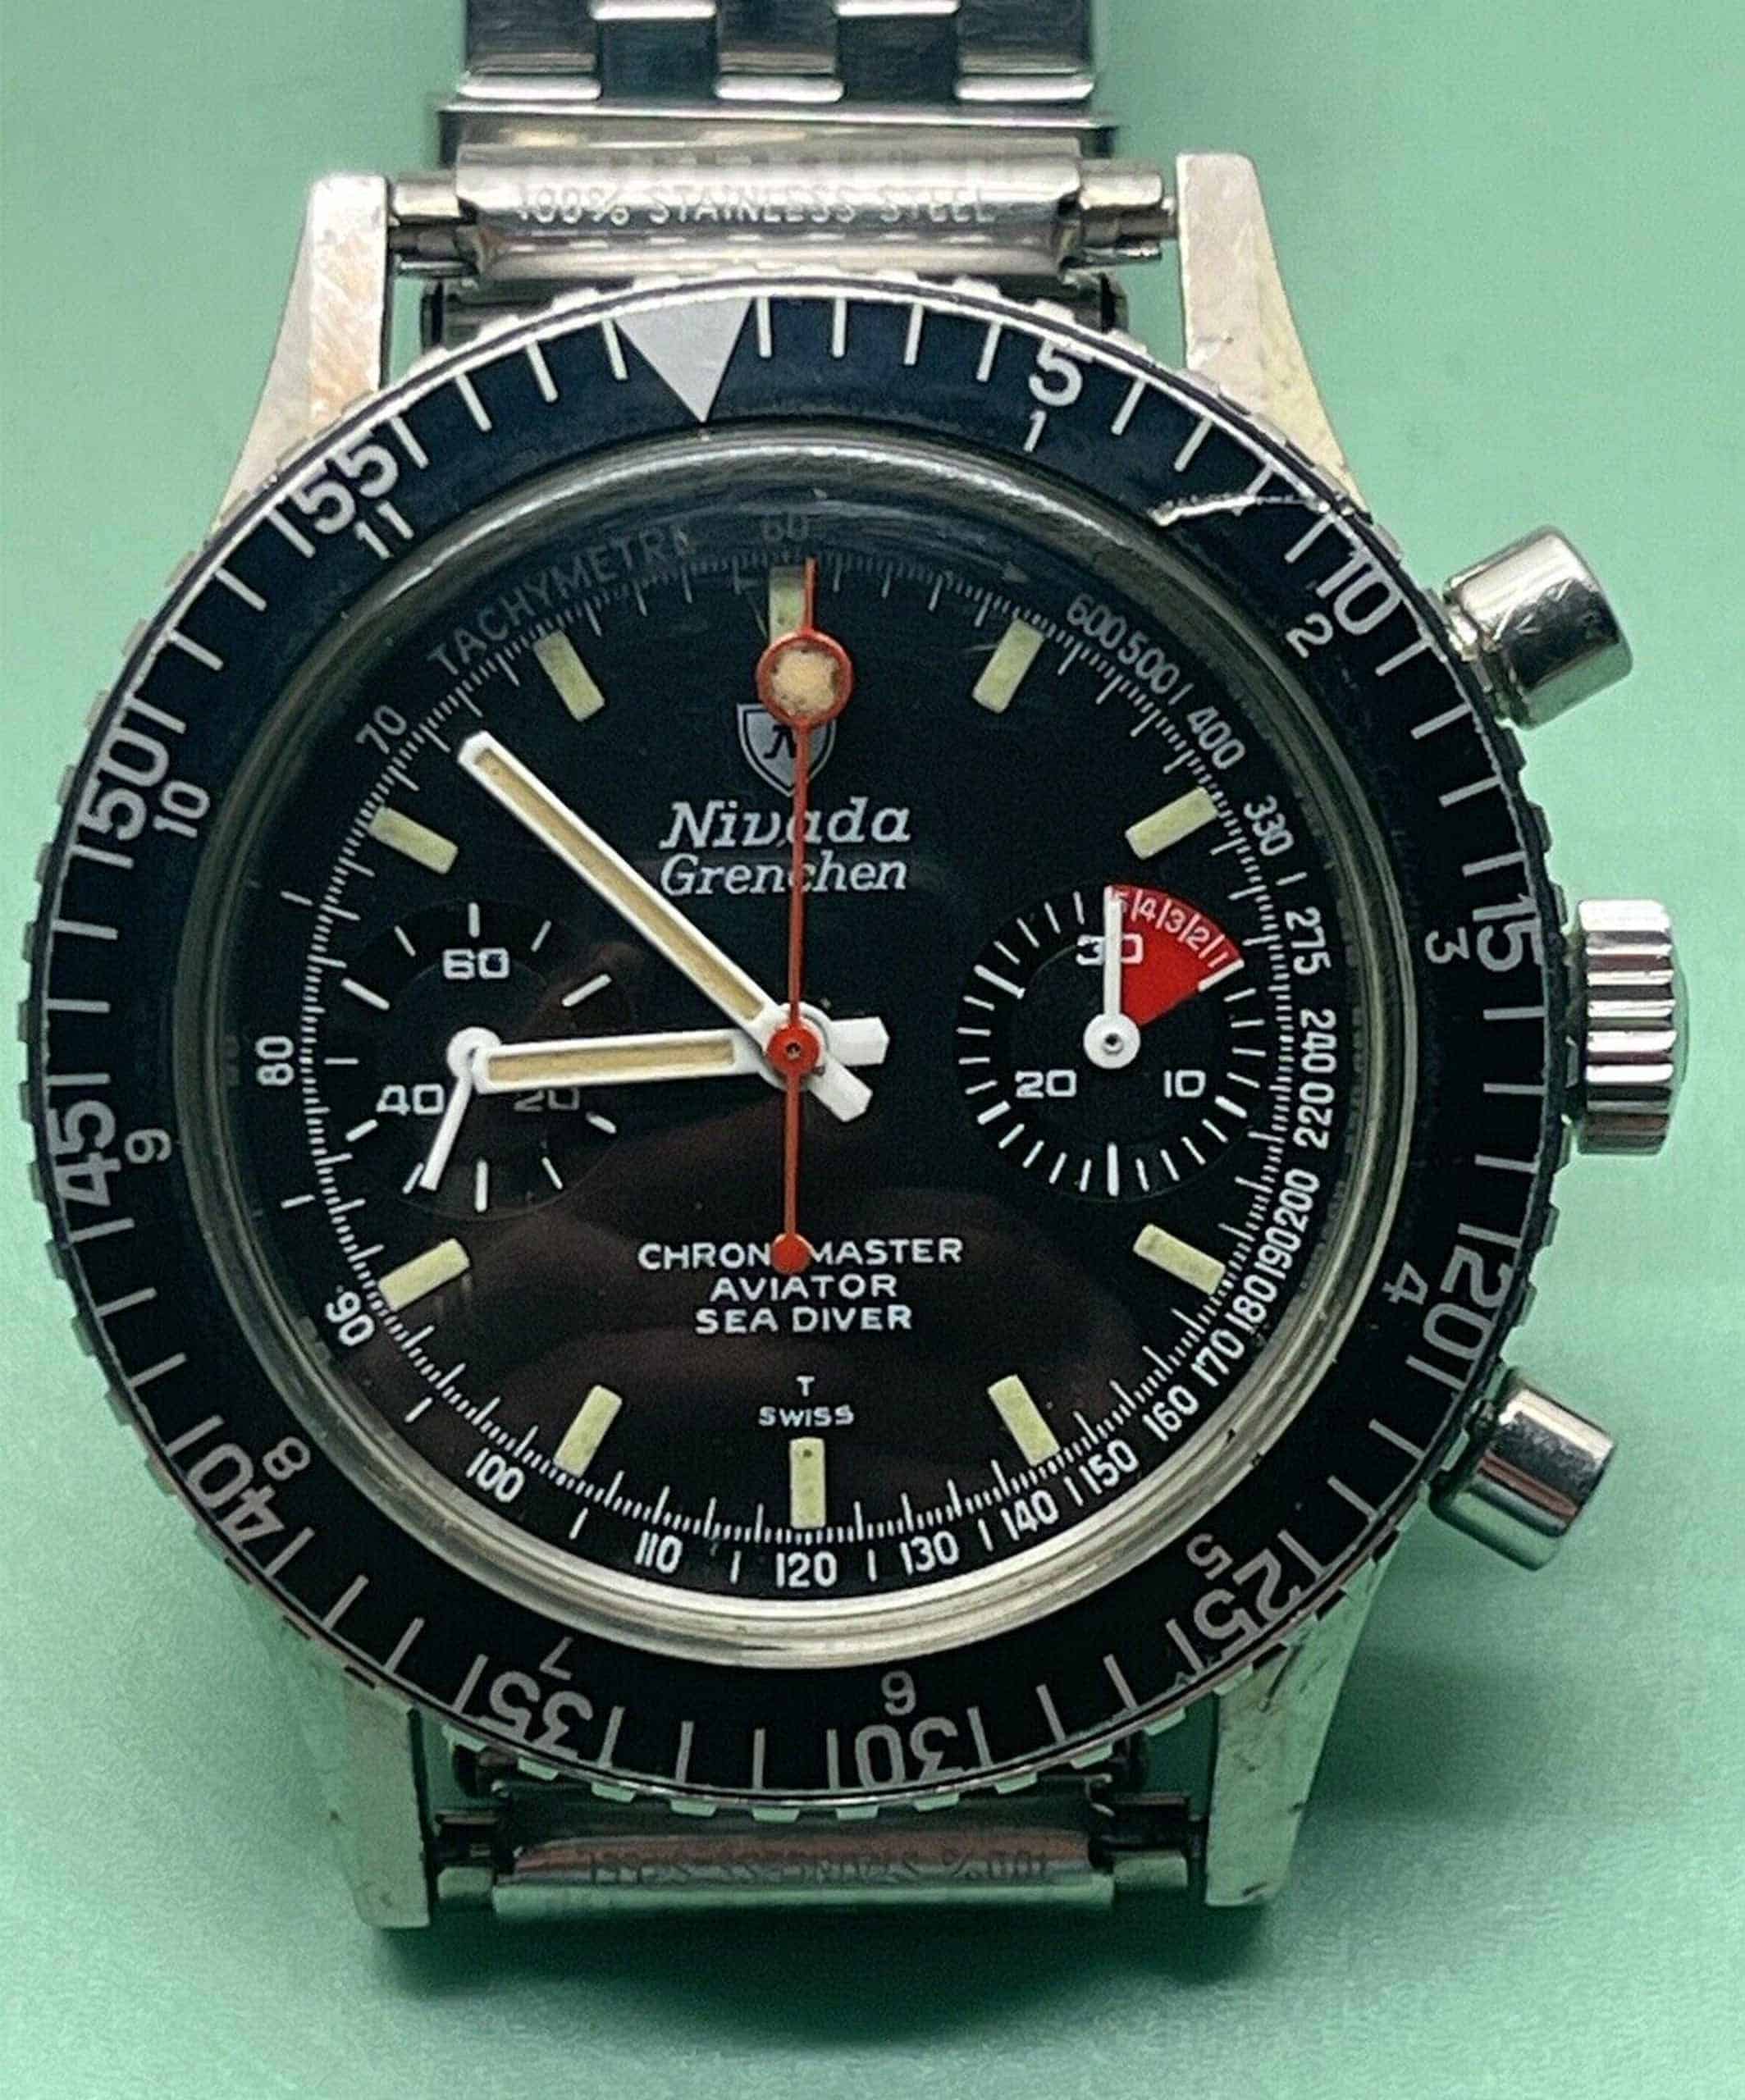 eBay Finds: A Legendary Seiko Diver, an Unusual Mondia Chronograph, and an LCD Watch by Texas Instruments